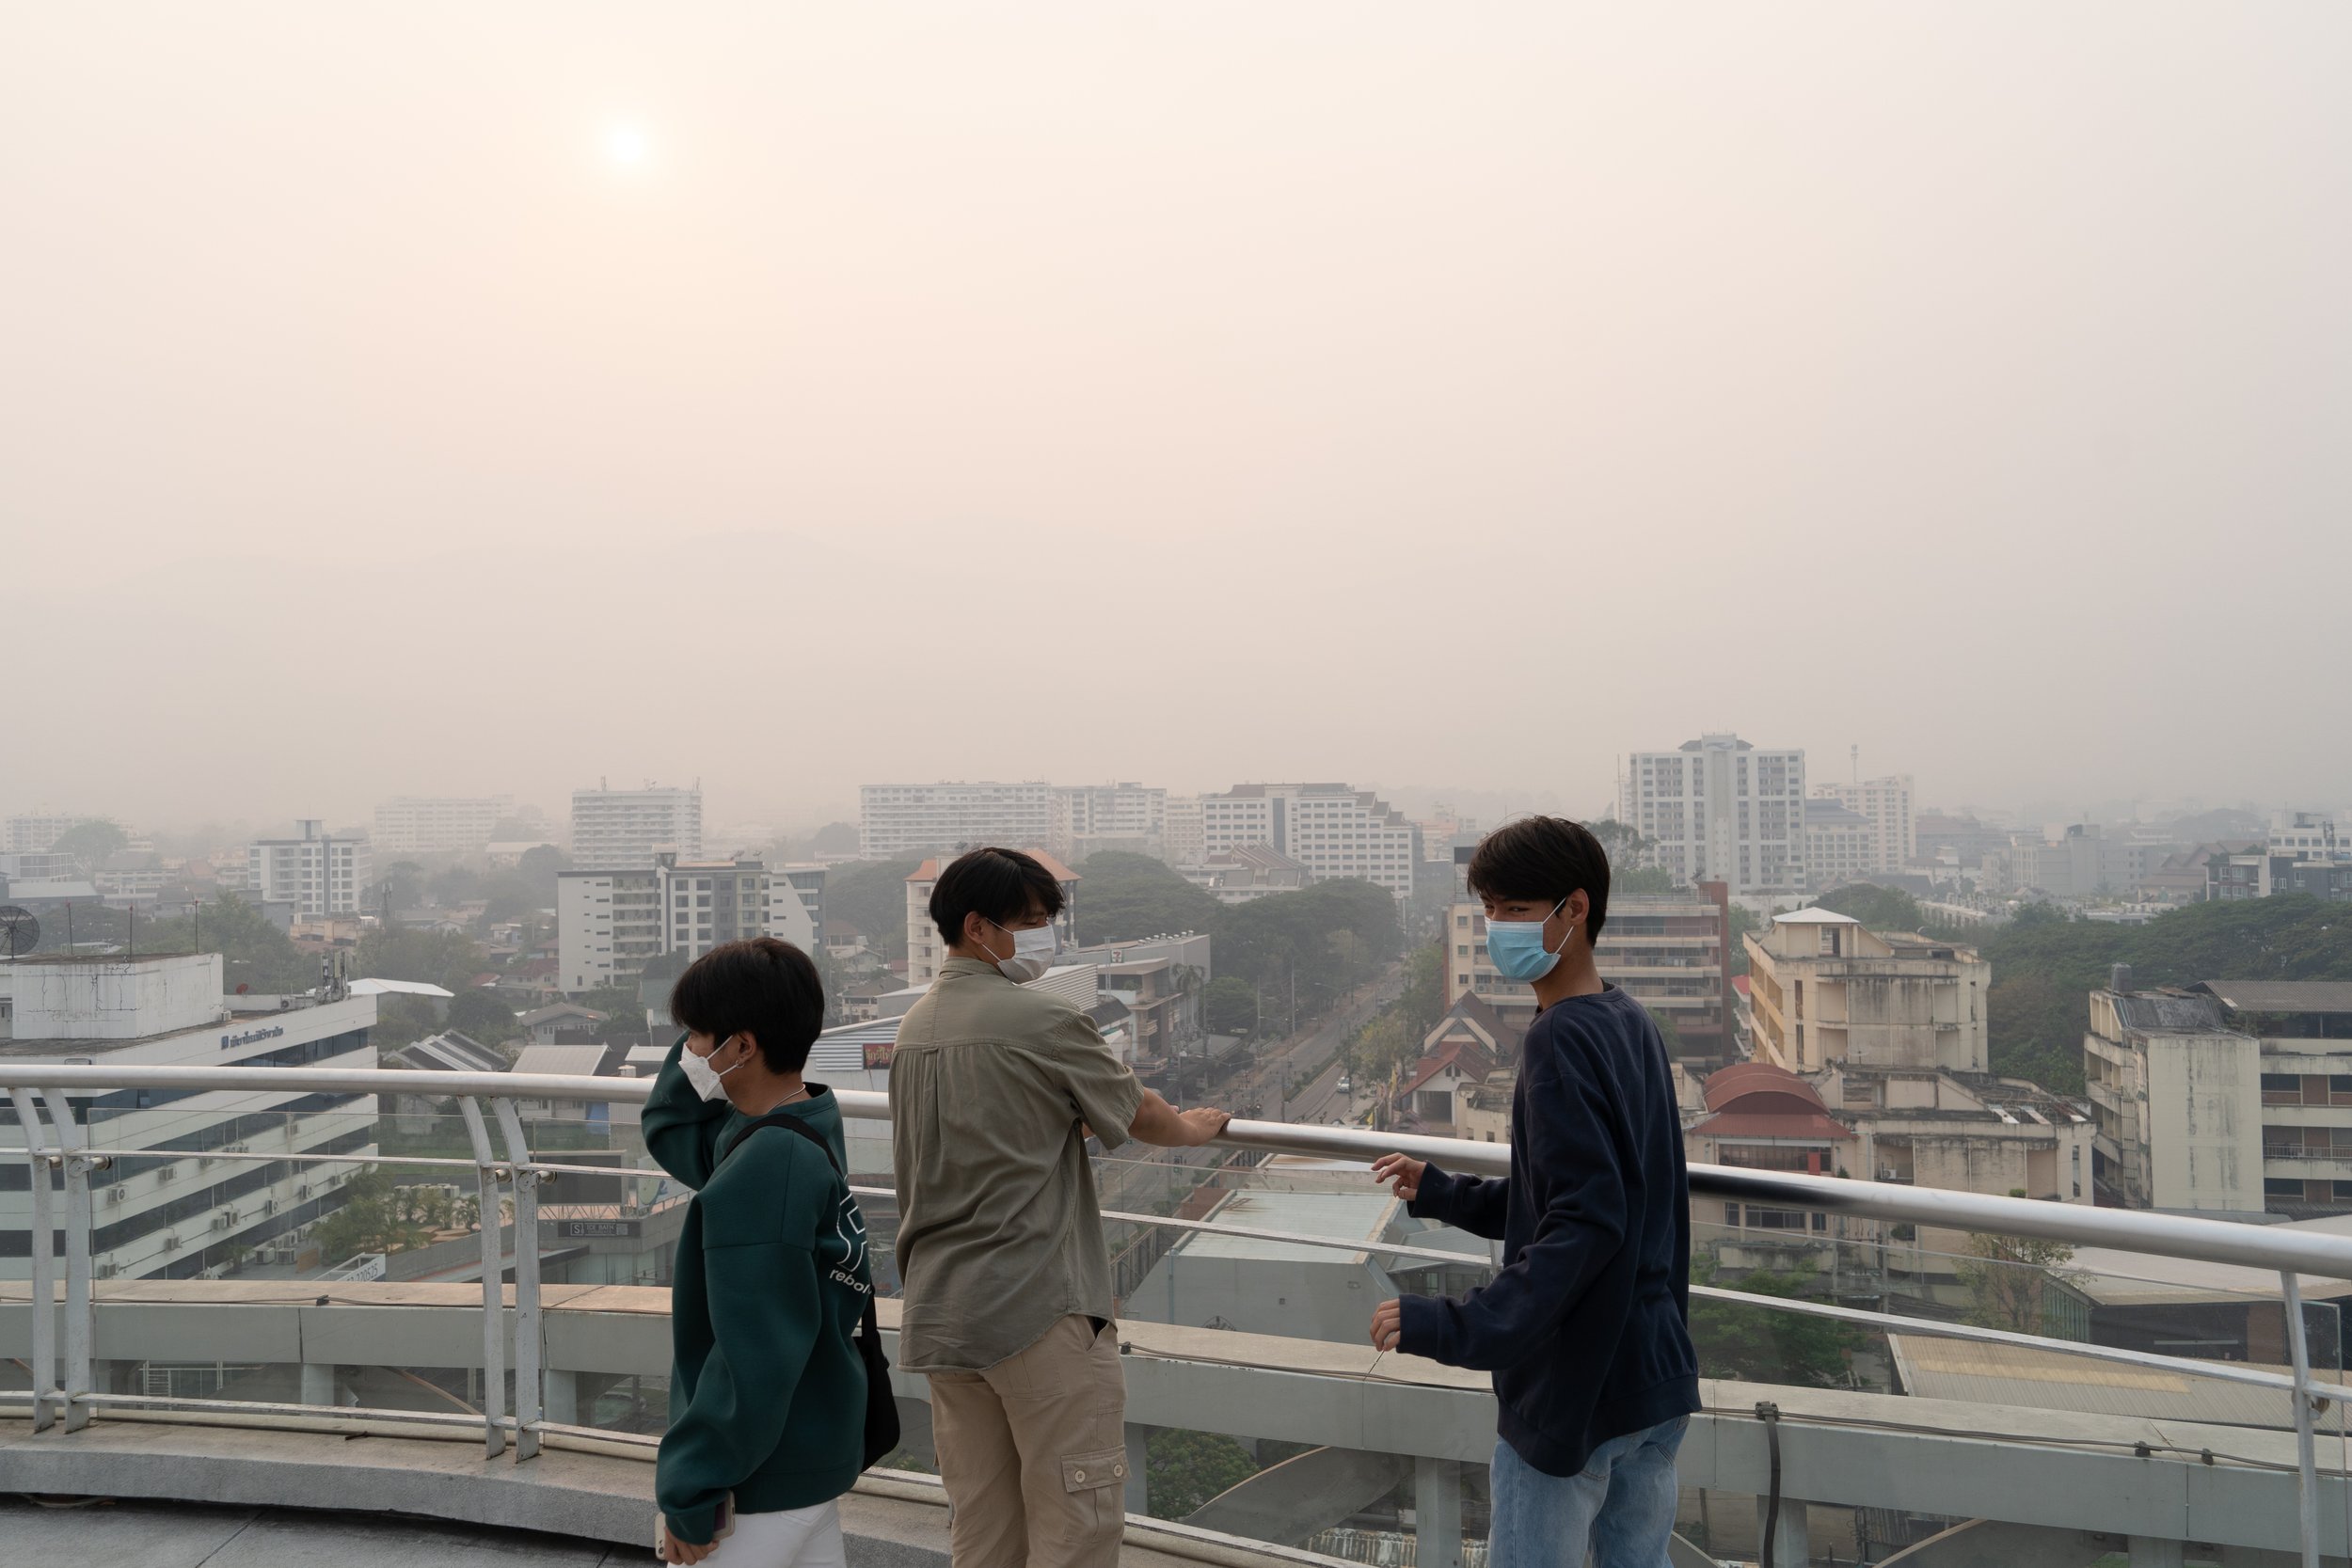  Thailand, Chiang Mai. 6 April 2023. On rooftops, residents are affected by the toxic smog of PM2.5 particles that blankets the city. High PM2.5 levels exceed 400 AQI values (air quality data measured by the app Air Visual). Roads and mountains are h